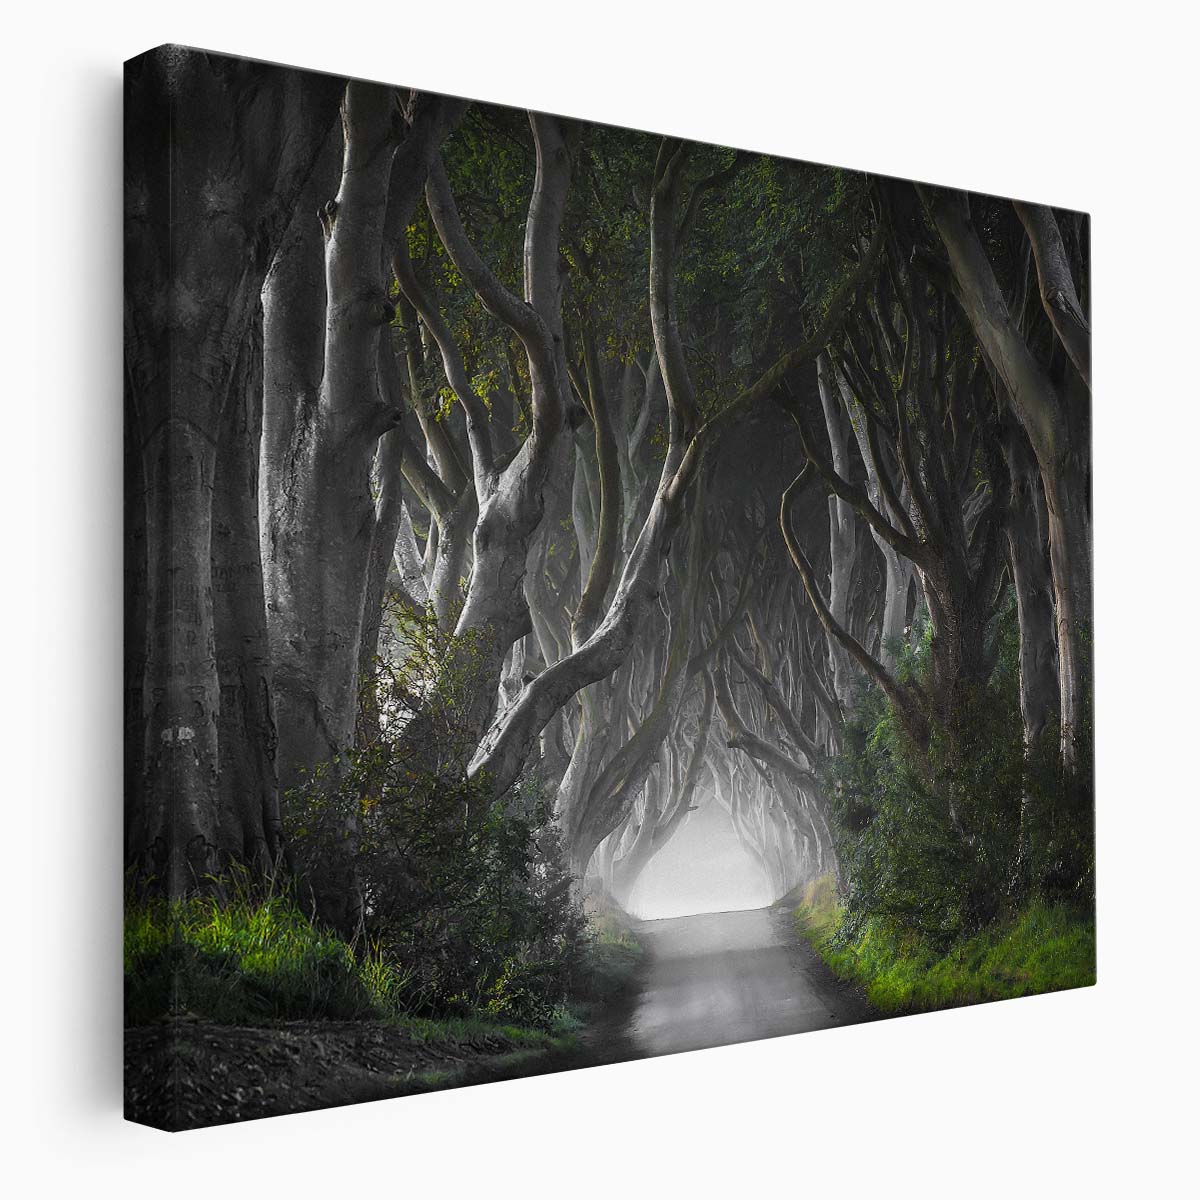 Enchanted Bregagh Road Dark Hedges Ireland Wall Art by Luxuriance Designs. Made in USA.